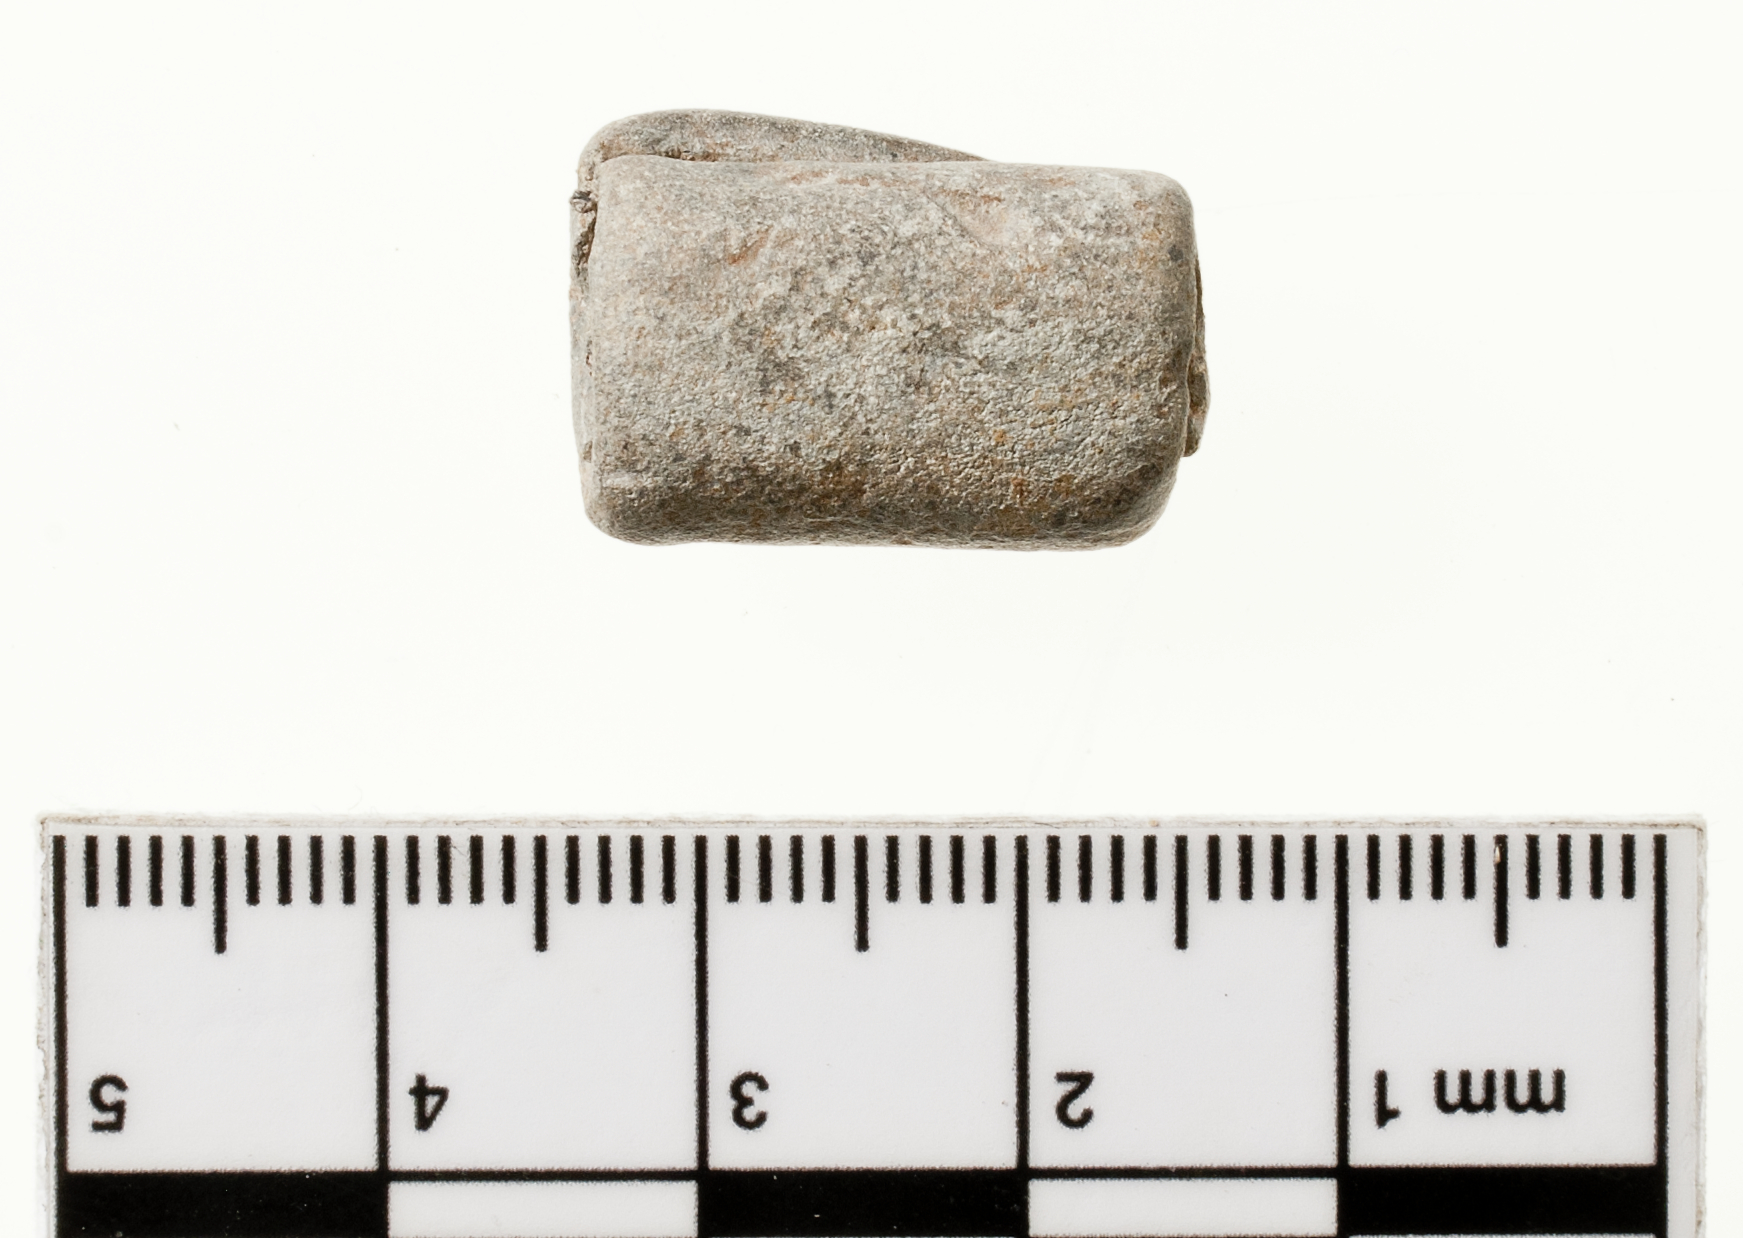 Medieval / Post-Medieval lead weight